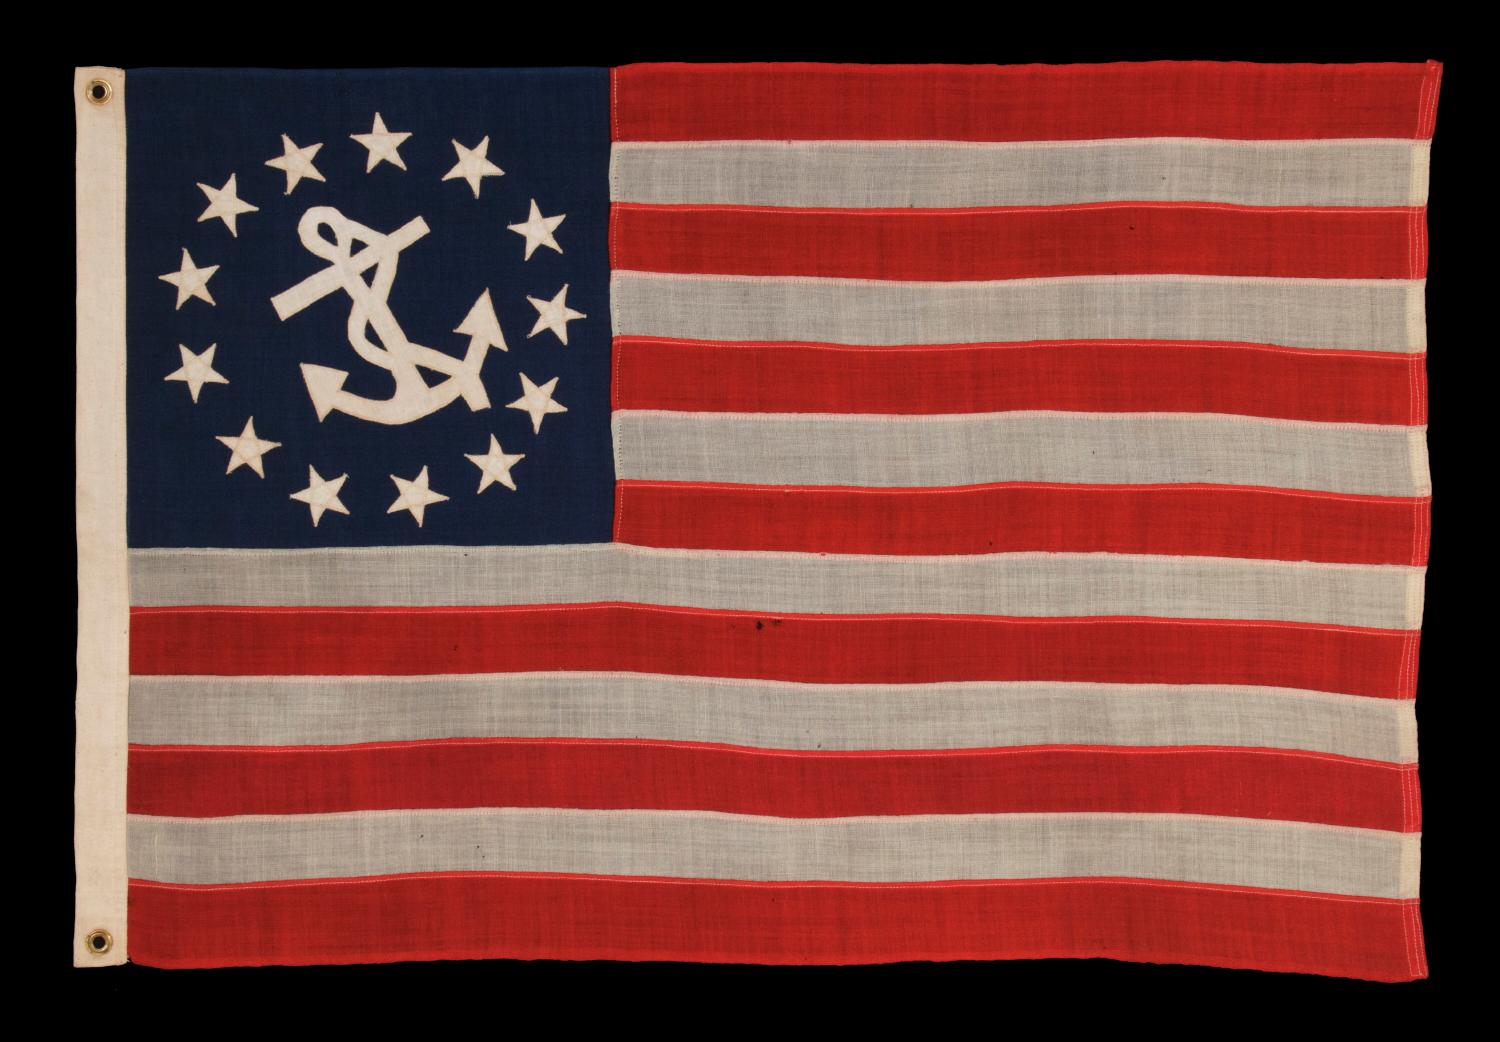 ANTIQUE AMERICAN PRIVATE YACHT FLAG (ENSIGN) WITH 13 STARS, 1895-1926 ERA :

The medallion configuration, 13-star, 13-stripe flag with a canted center anchor was entered into official use in 1848, following an act of Congress, that made it the